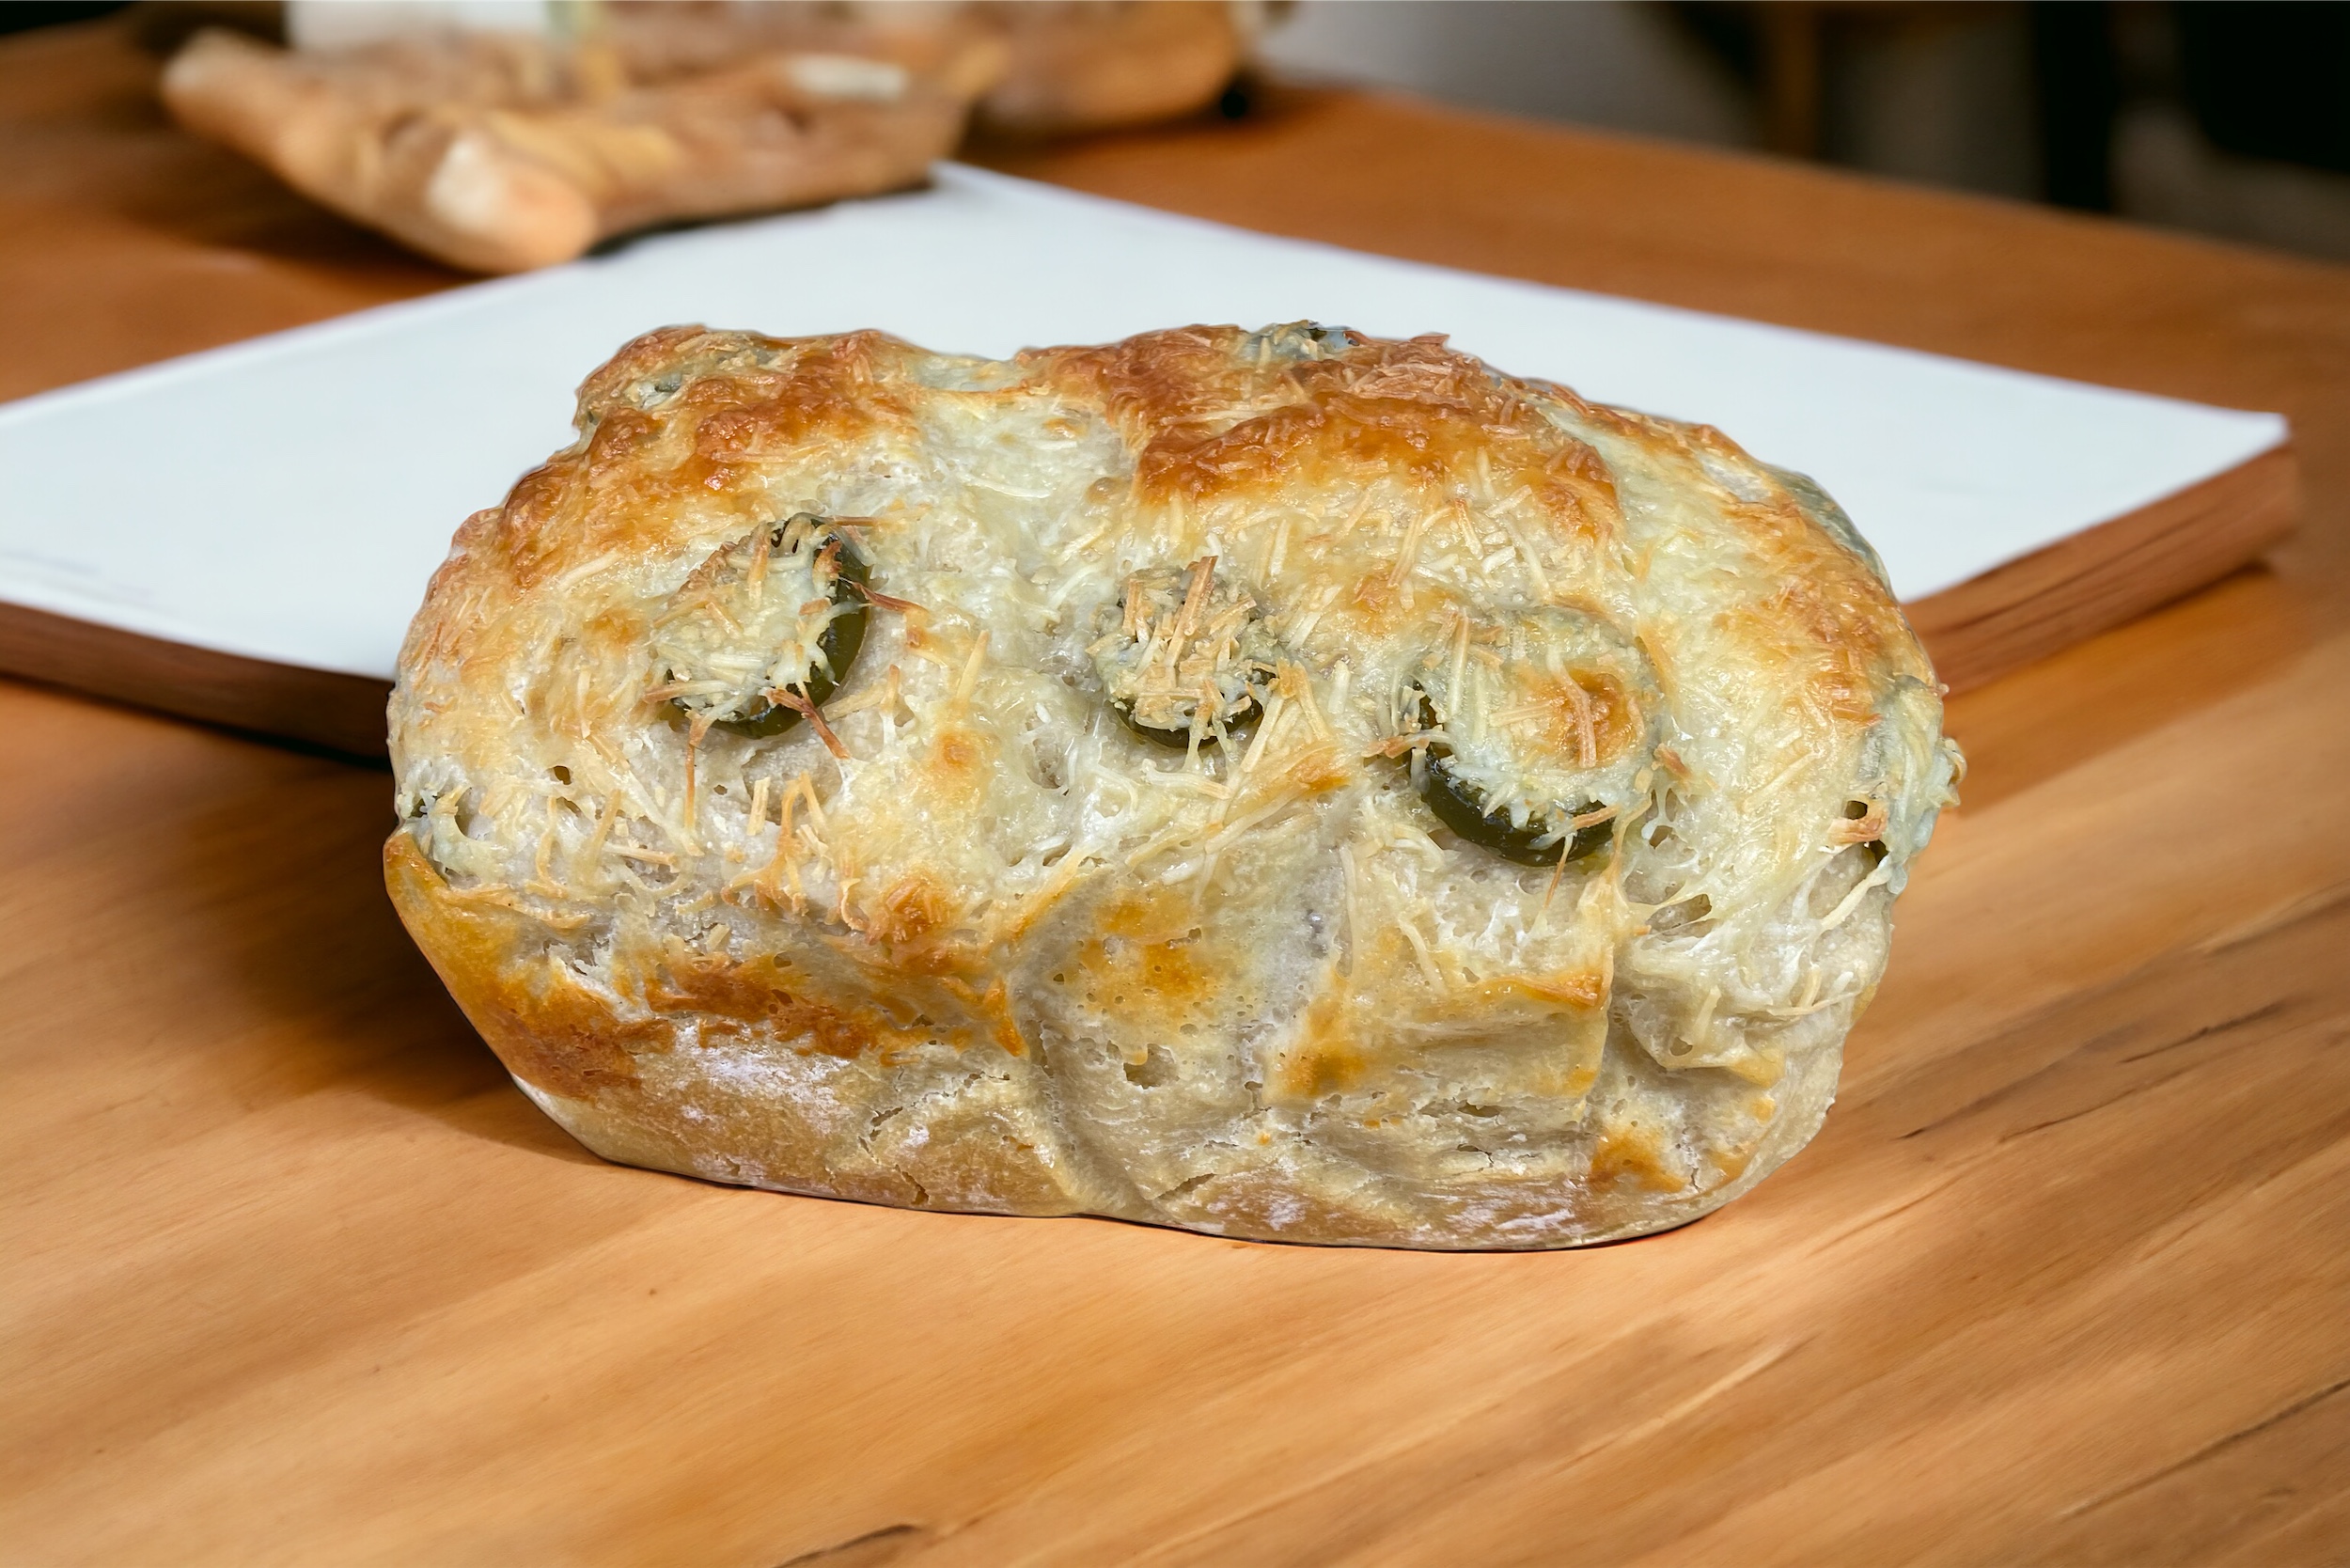 Jalapeno and Cheese Sourdough Bread